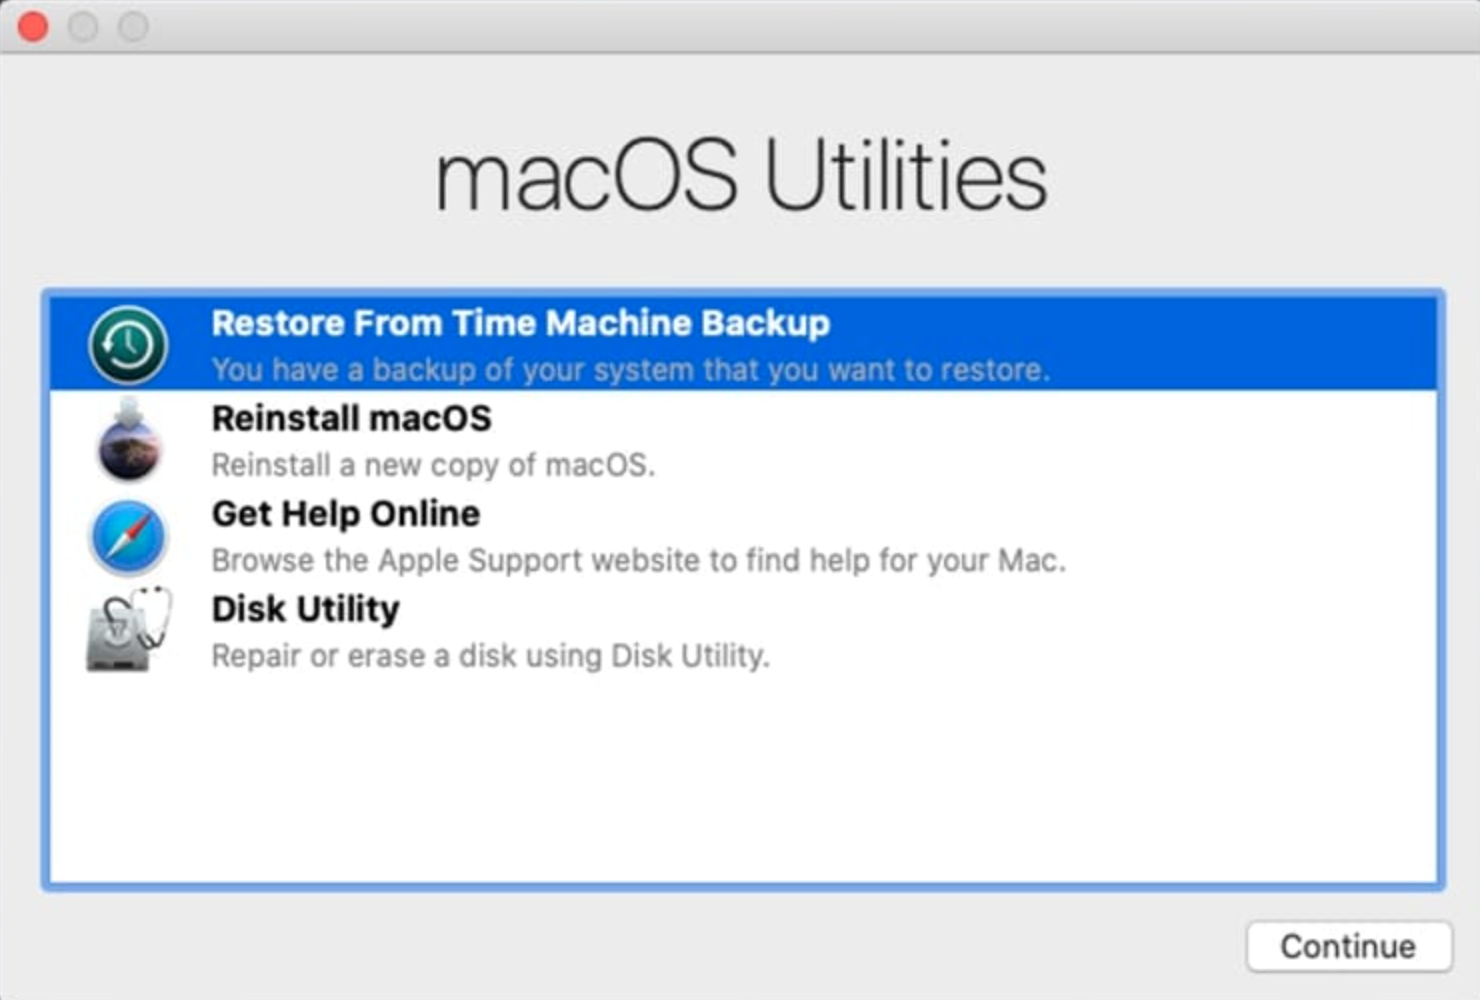 macOS Utilities > Restore From Time Machine Backup